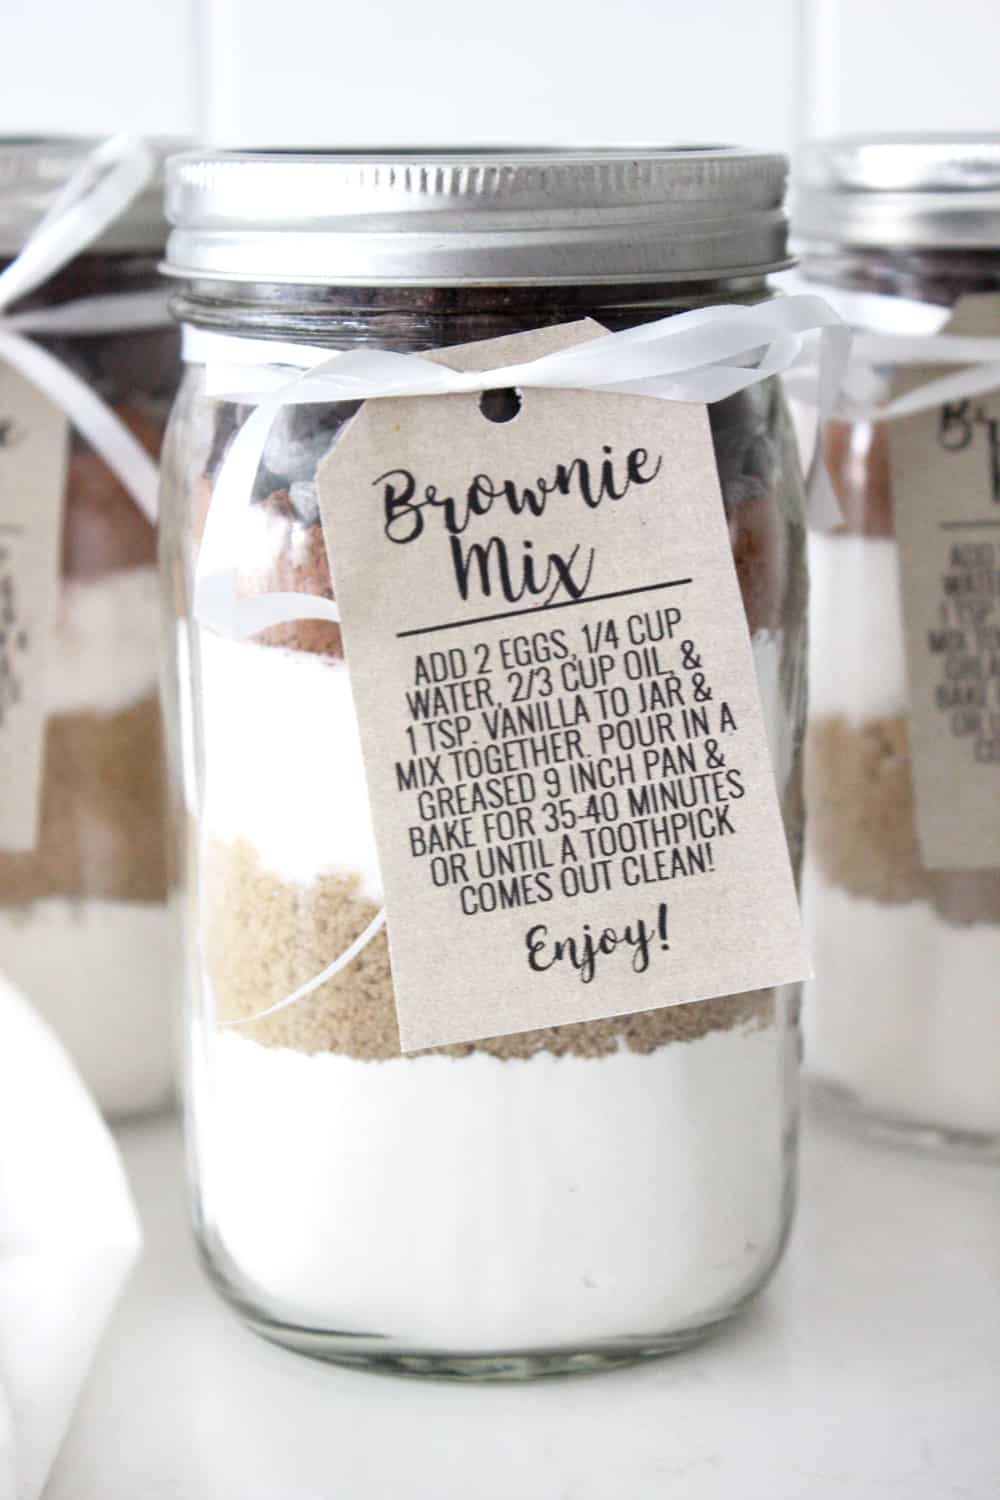 Pre-made brownie mix gift idea with free printable tag! Perfect easy gift for neighbors or friends! 